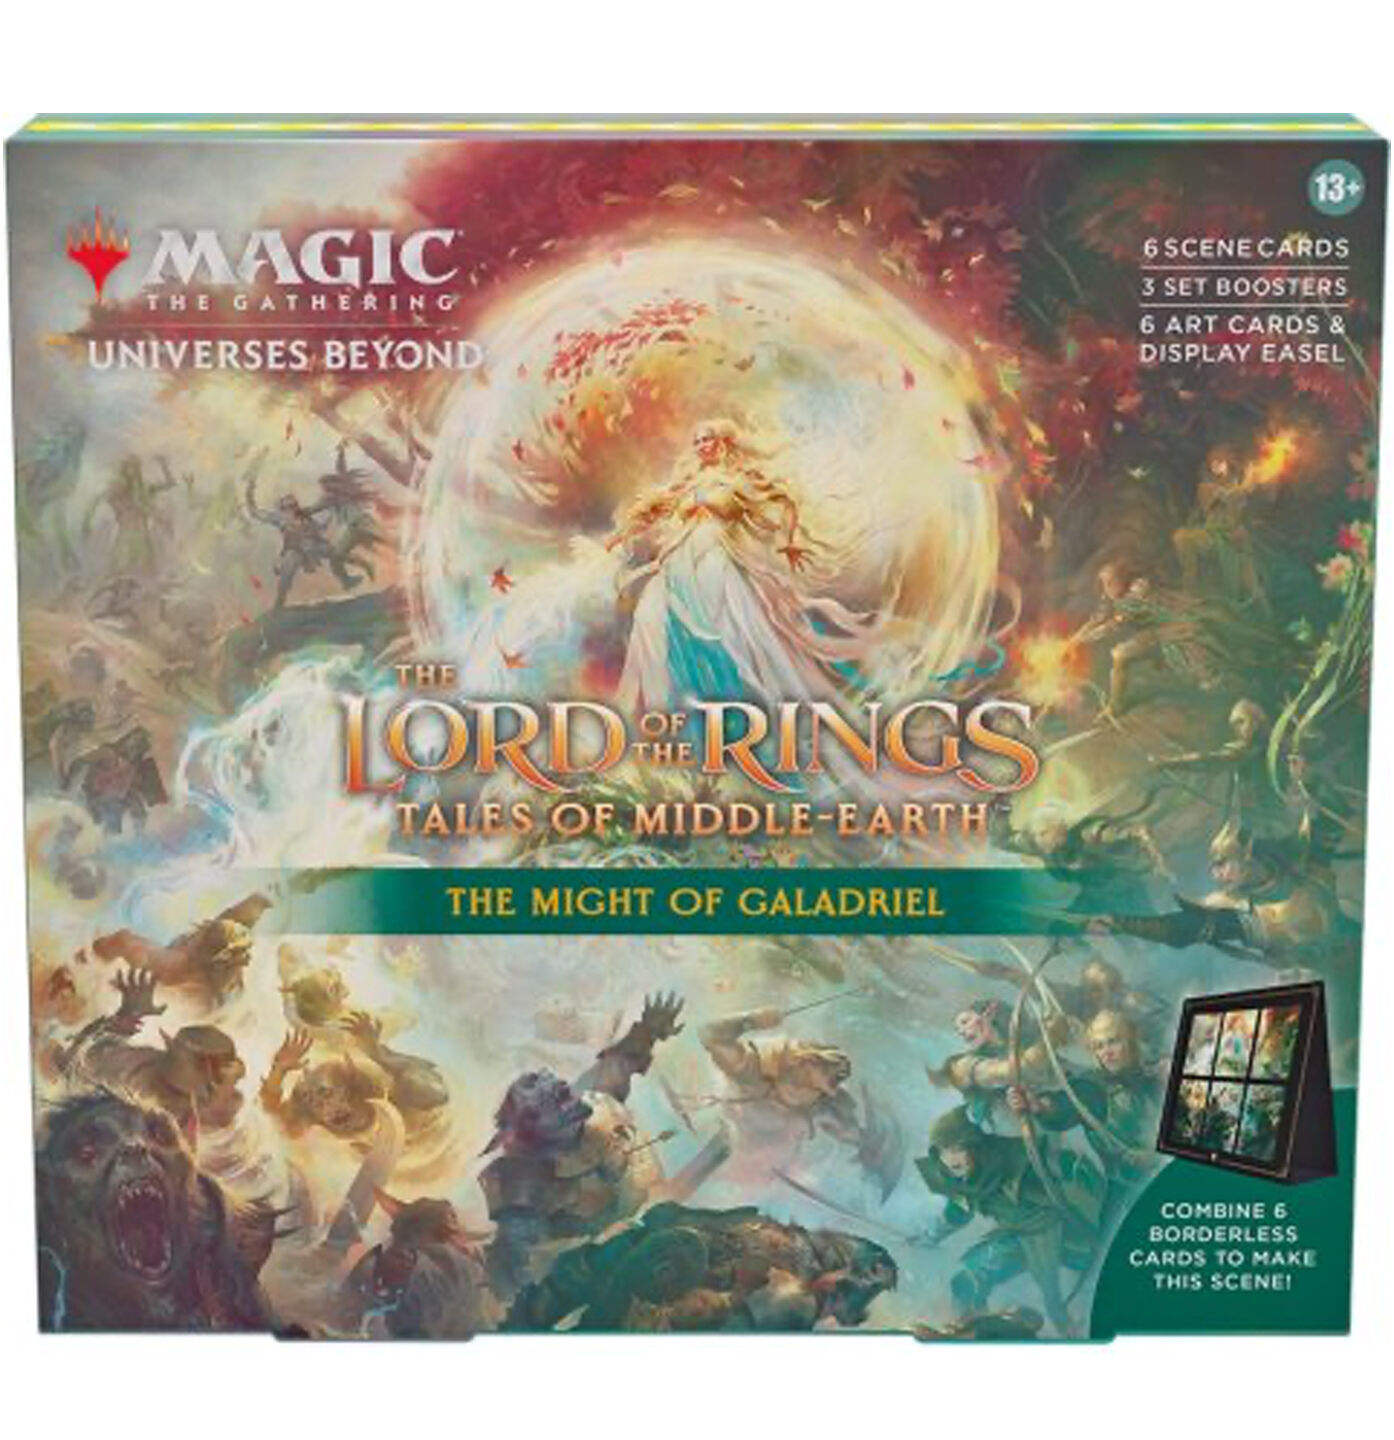 The Lord of the Rings: Tales of Middle-earth Scene Box The Might of Galadriel - Magic the Gathering - EN